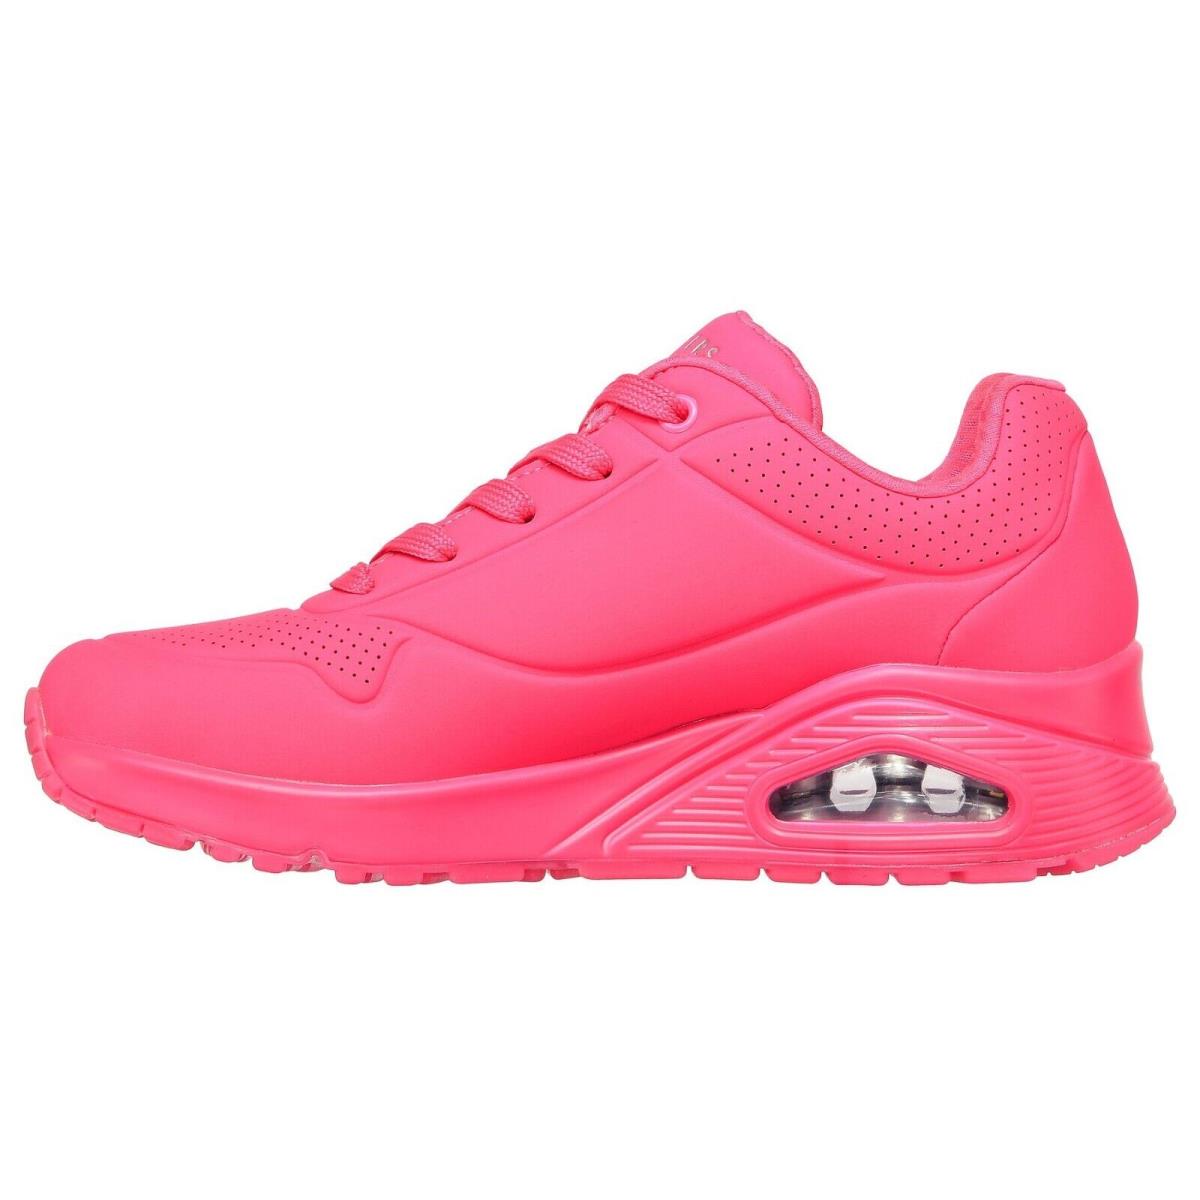 Skechers shoes Uno Night Shades - Hot Pink 15